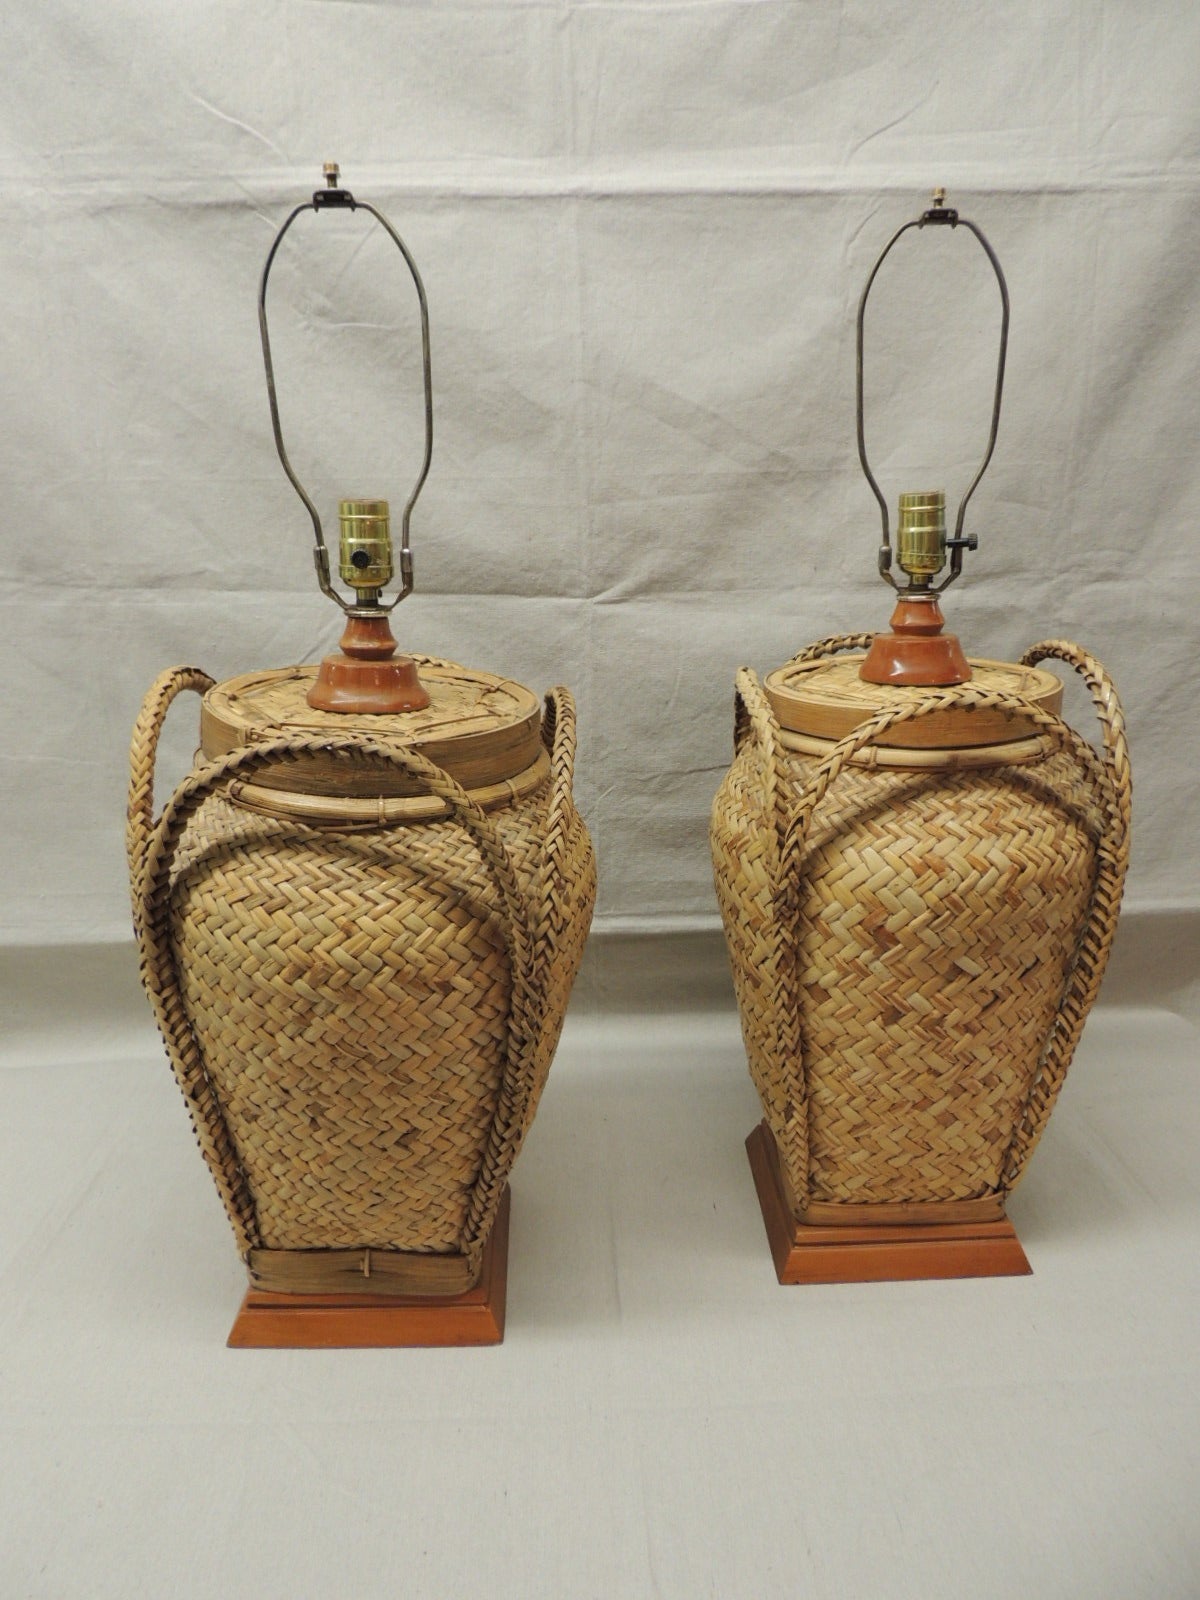 Pair of tall rattan reed detail lamps mounted on wood bases with handles. Basket weave design. (Shades not included). 3 way switch. 30